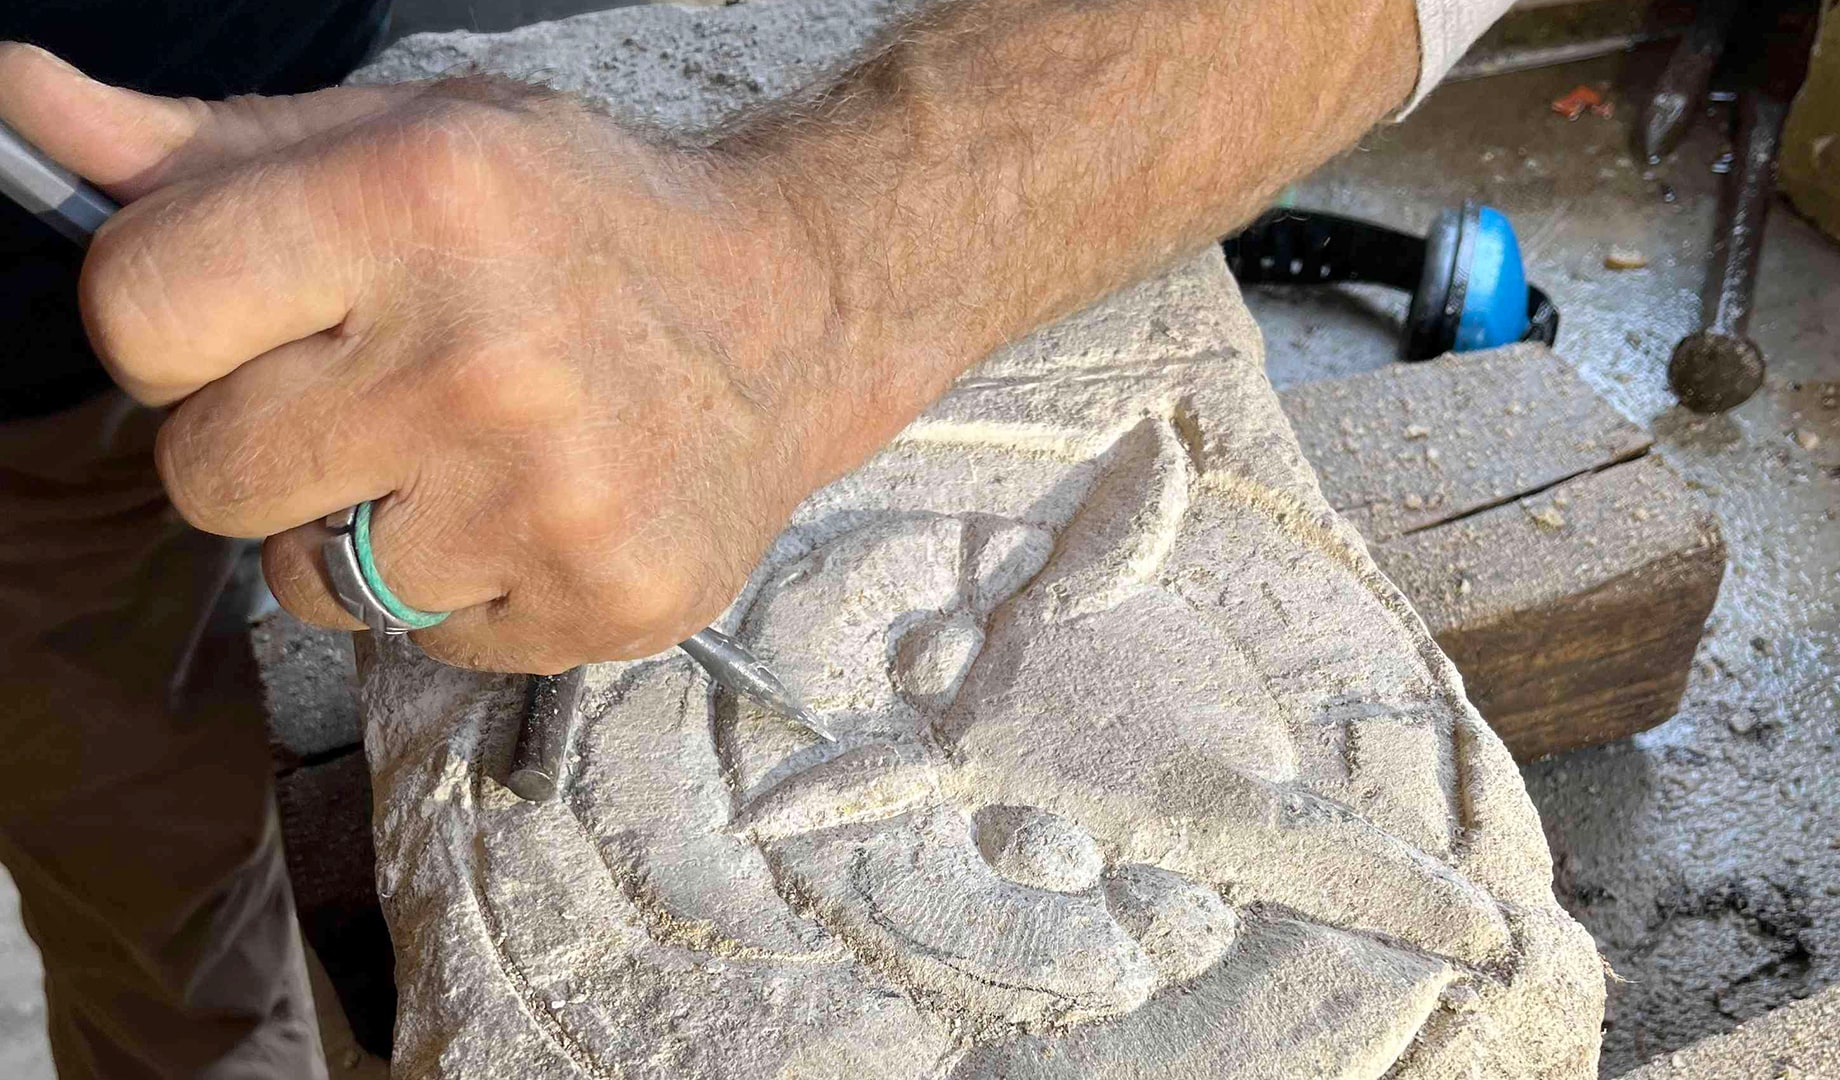 A hand with a metal tool carves an owl into a stone.